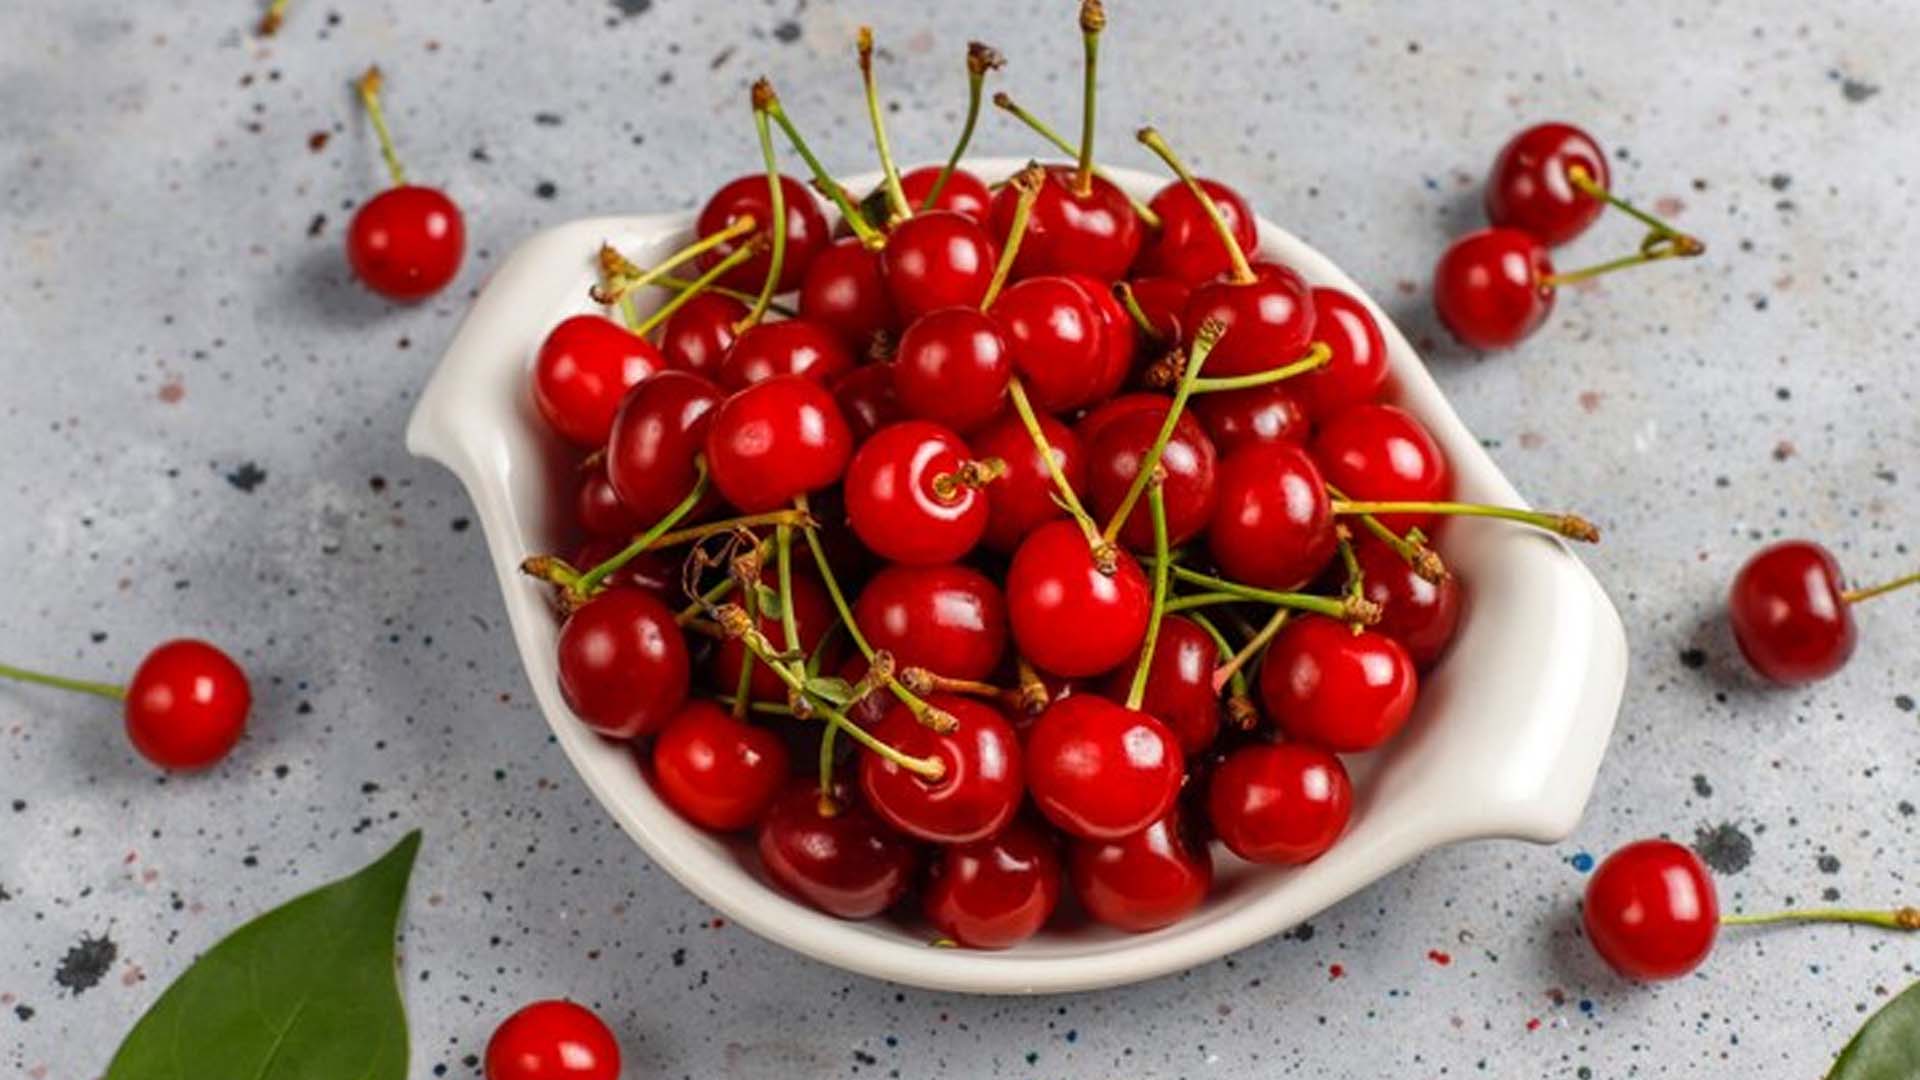 10 Health Benefits And Nutritional Facts Of Cherries